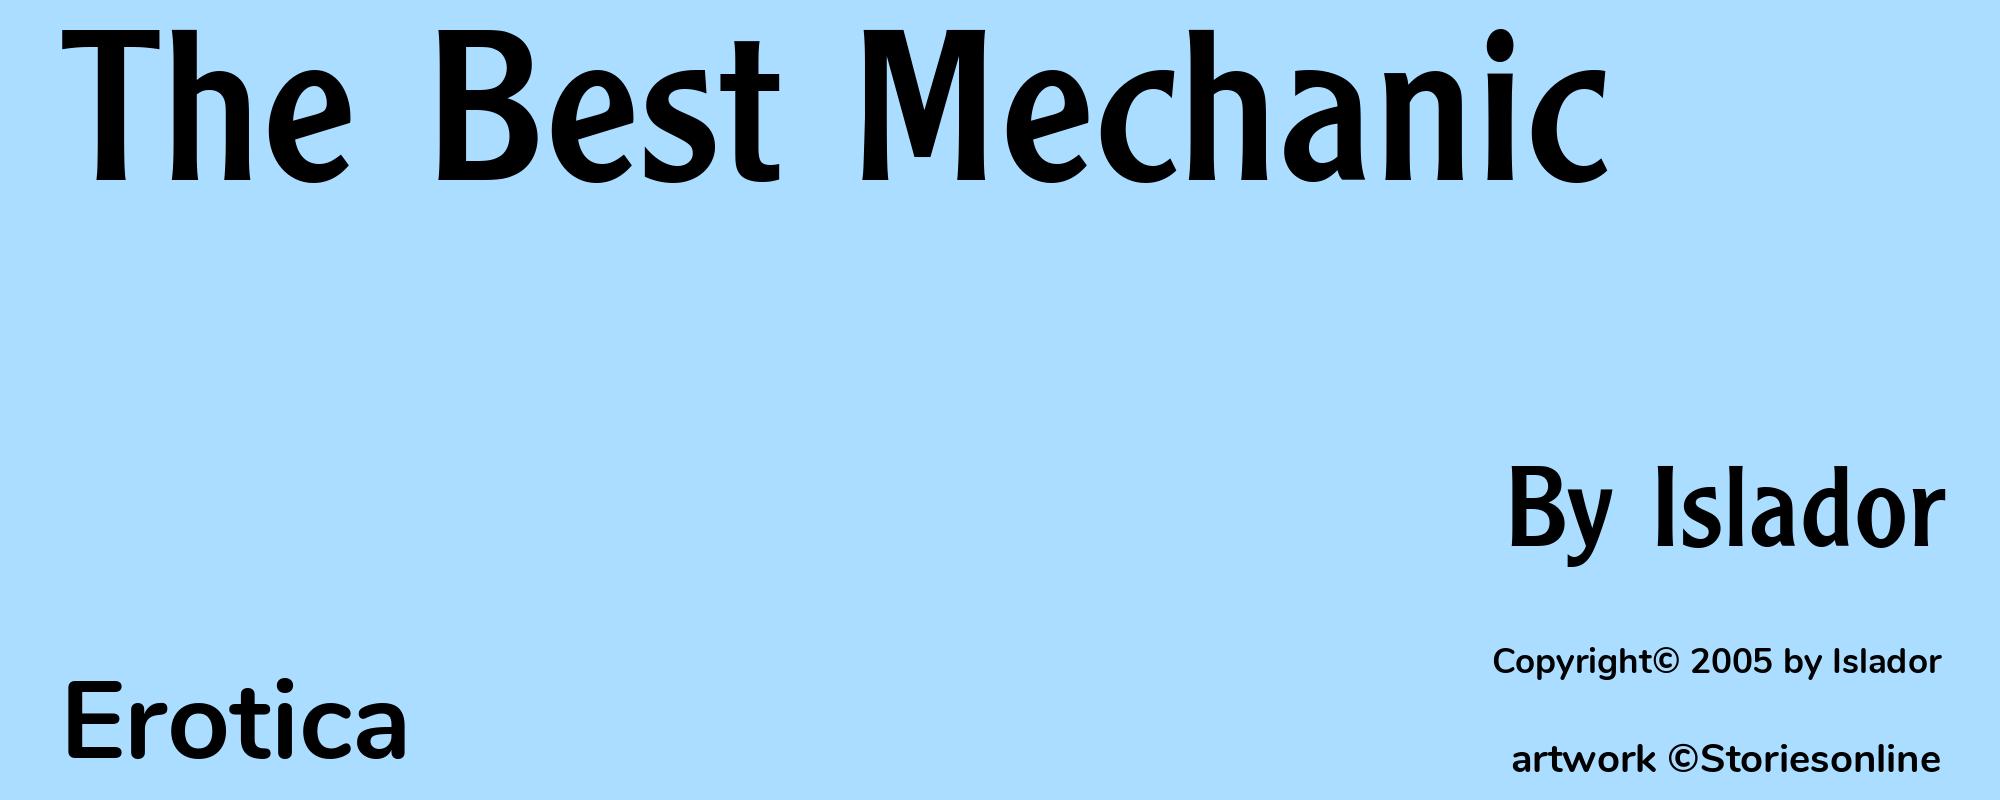 The Best Mechanic - Cover